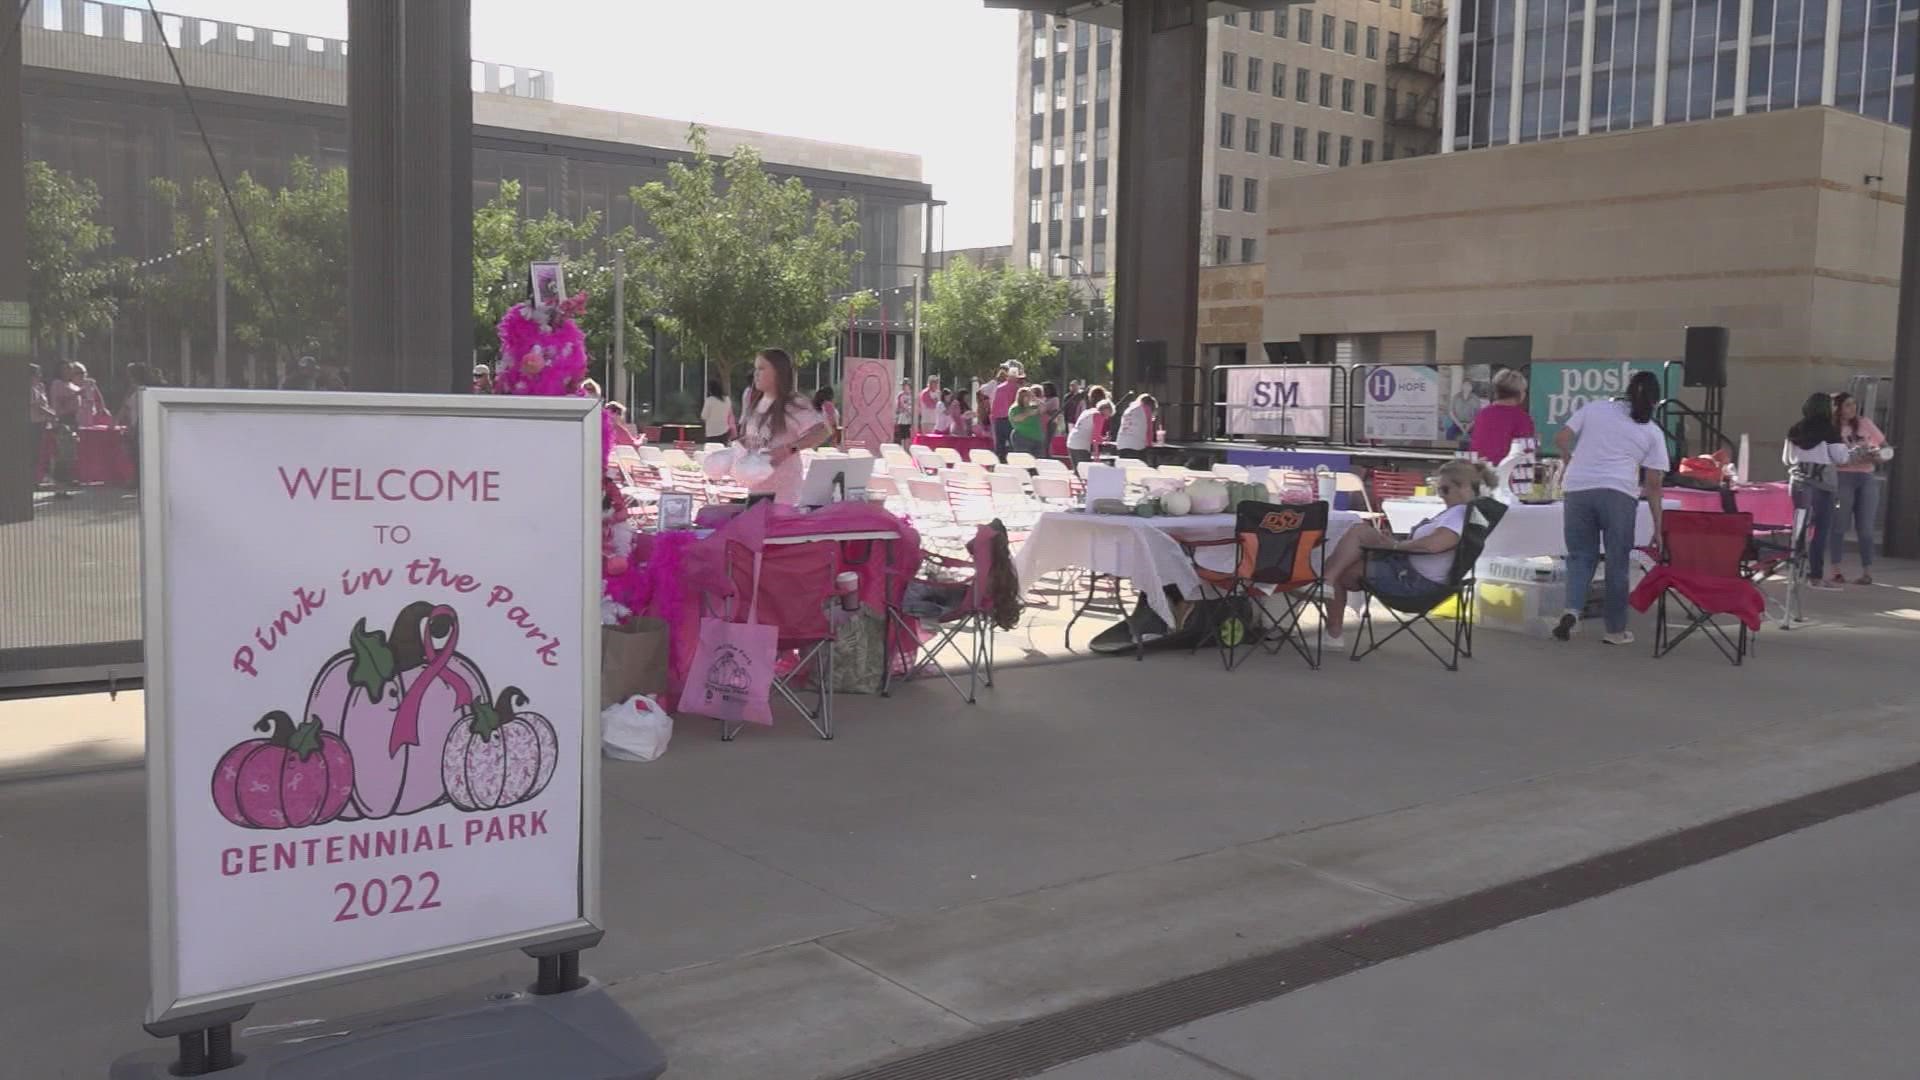 The event took place at Centennial Park in Downtown Midland and spread awareness for breast cancer and their survivors.